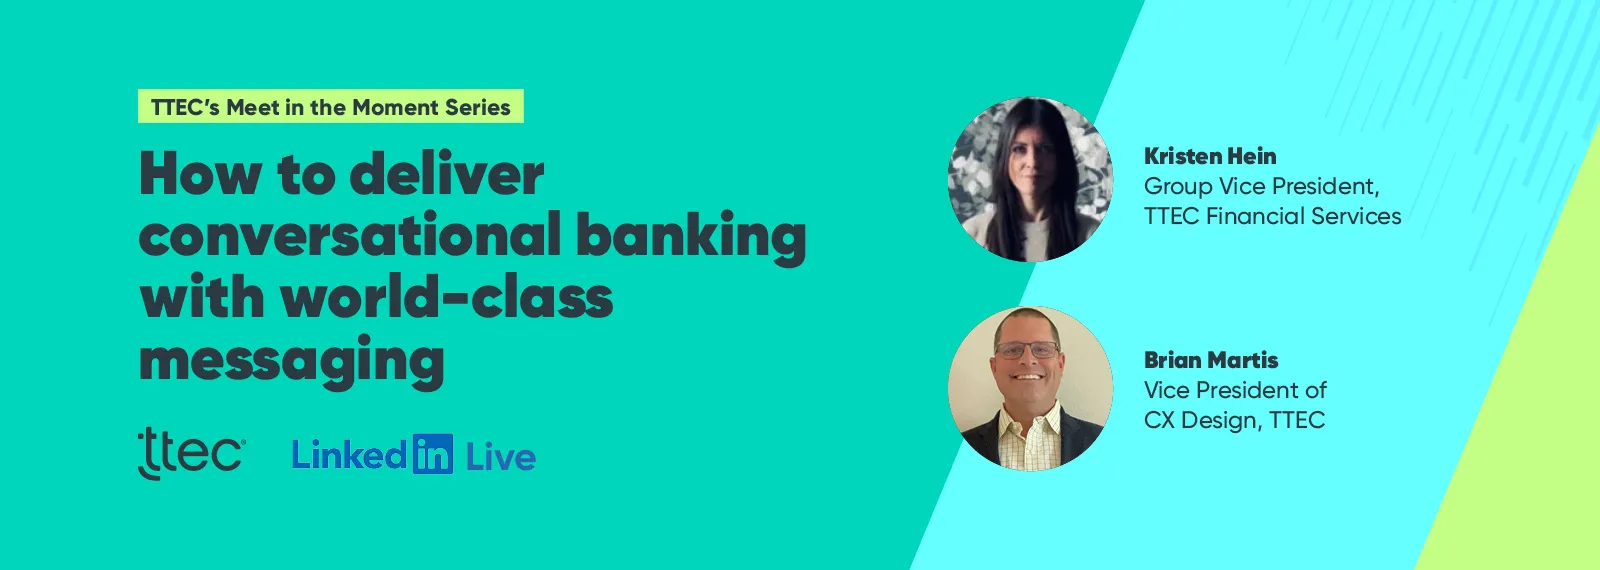 How to deliver conversational banking with world-class messaging